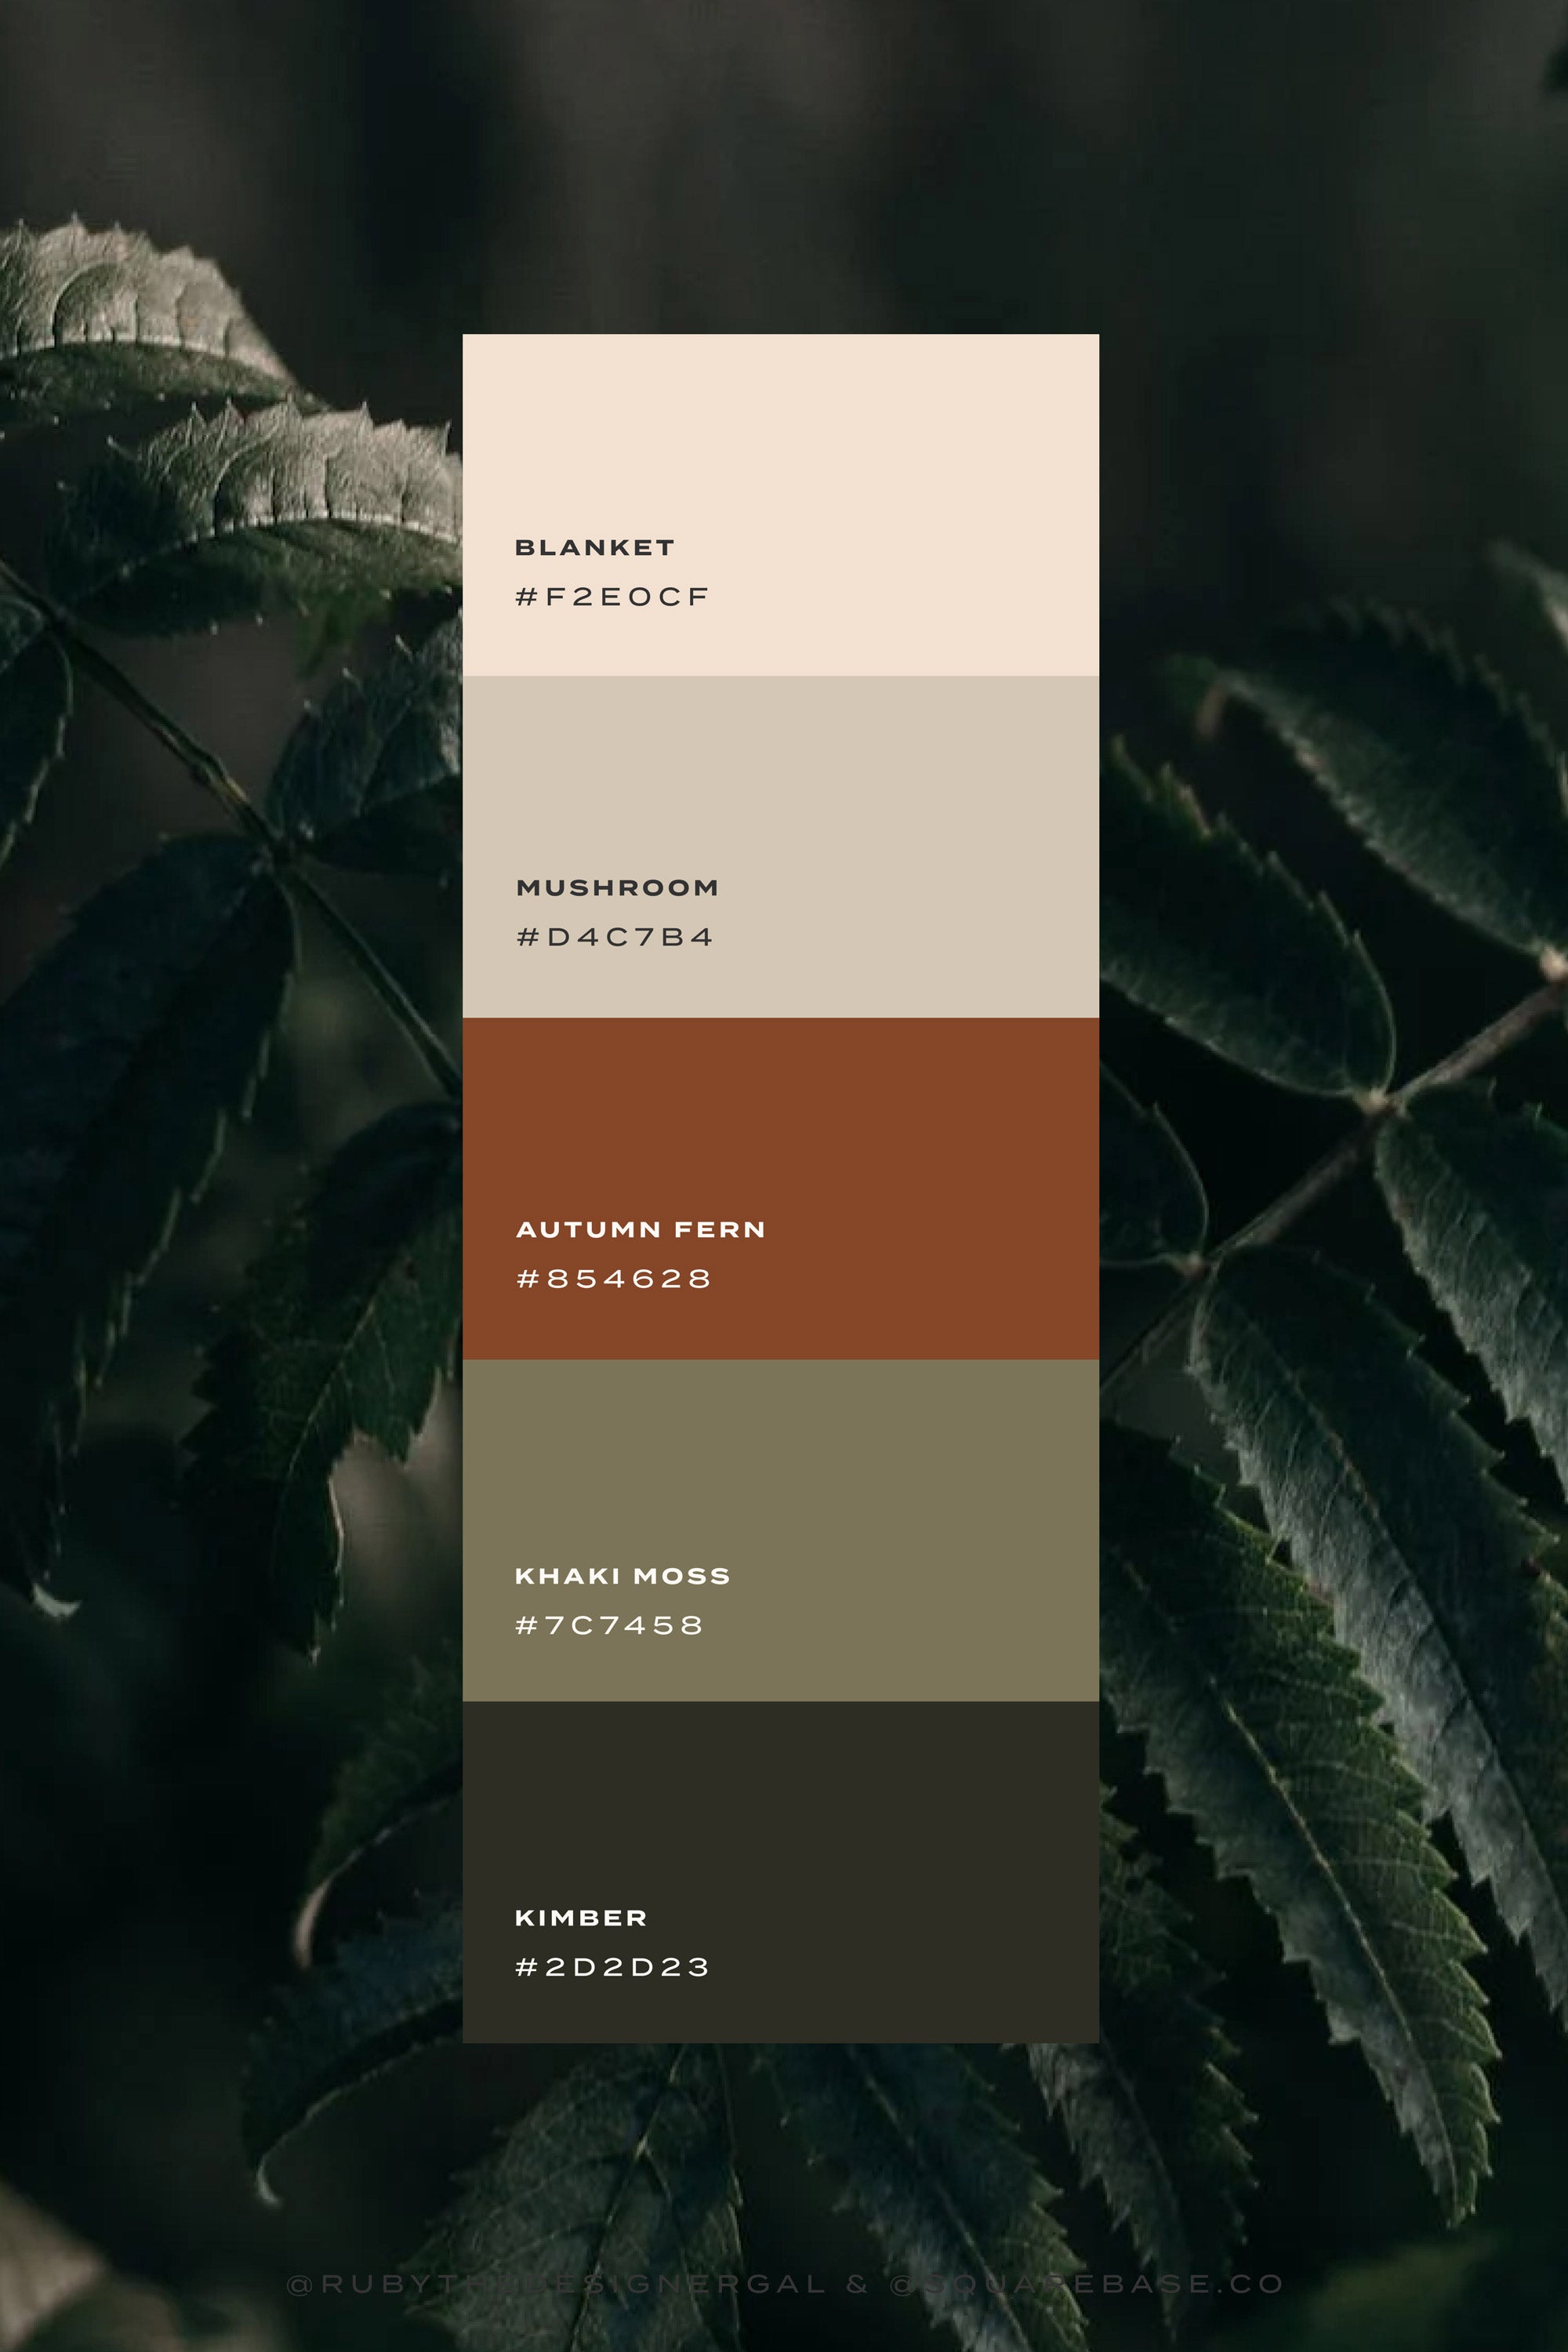 Autumnal Fall Colour Palettes for your Squarespace Brand and Website created by London Design Studio, Studio 77